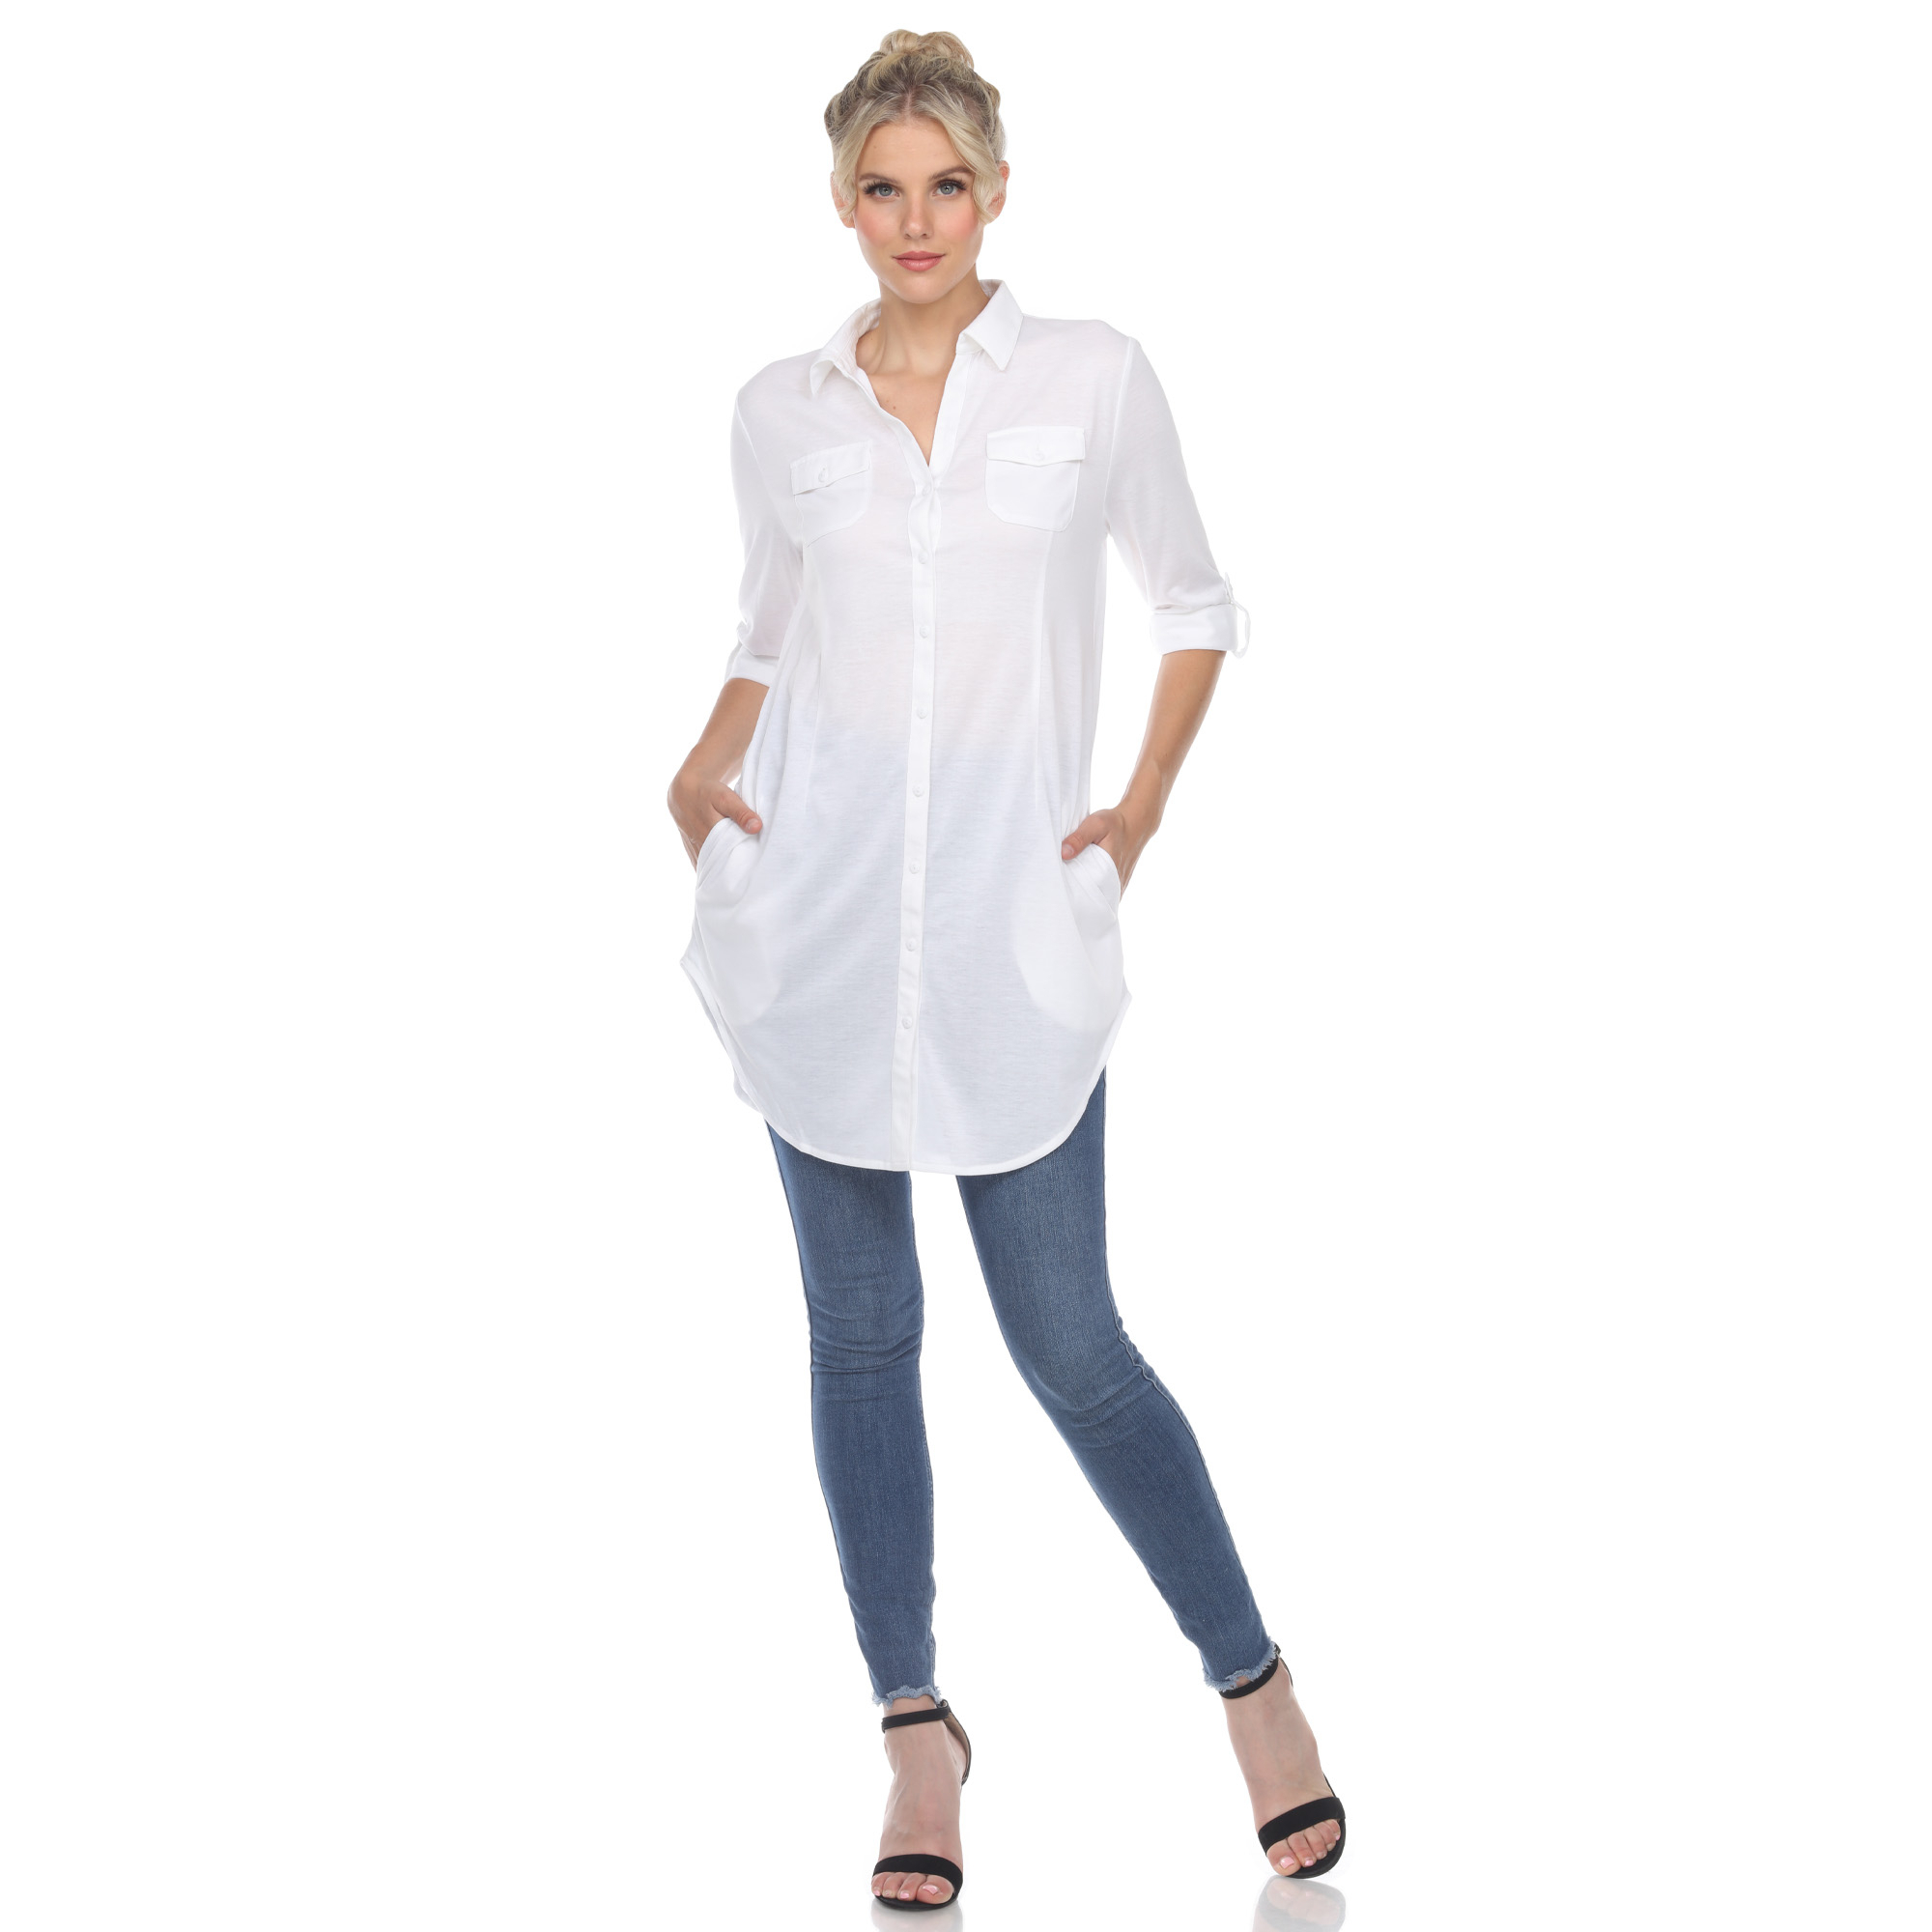 White Mark Women's Stretchy Quarter Sleeve Button Down Tunic Top With Pockets - White, 2X